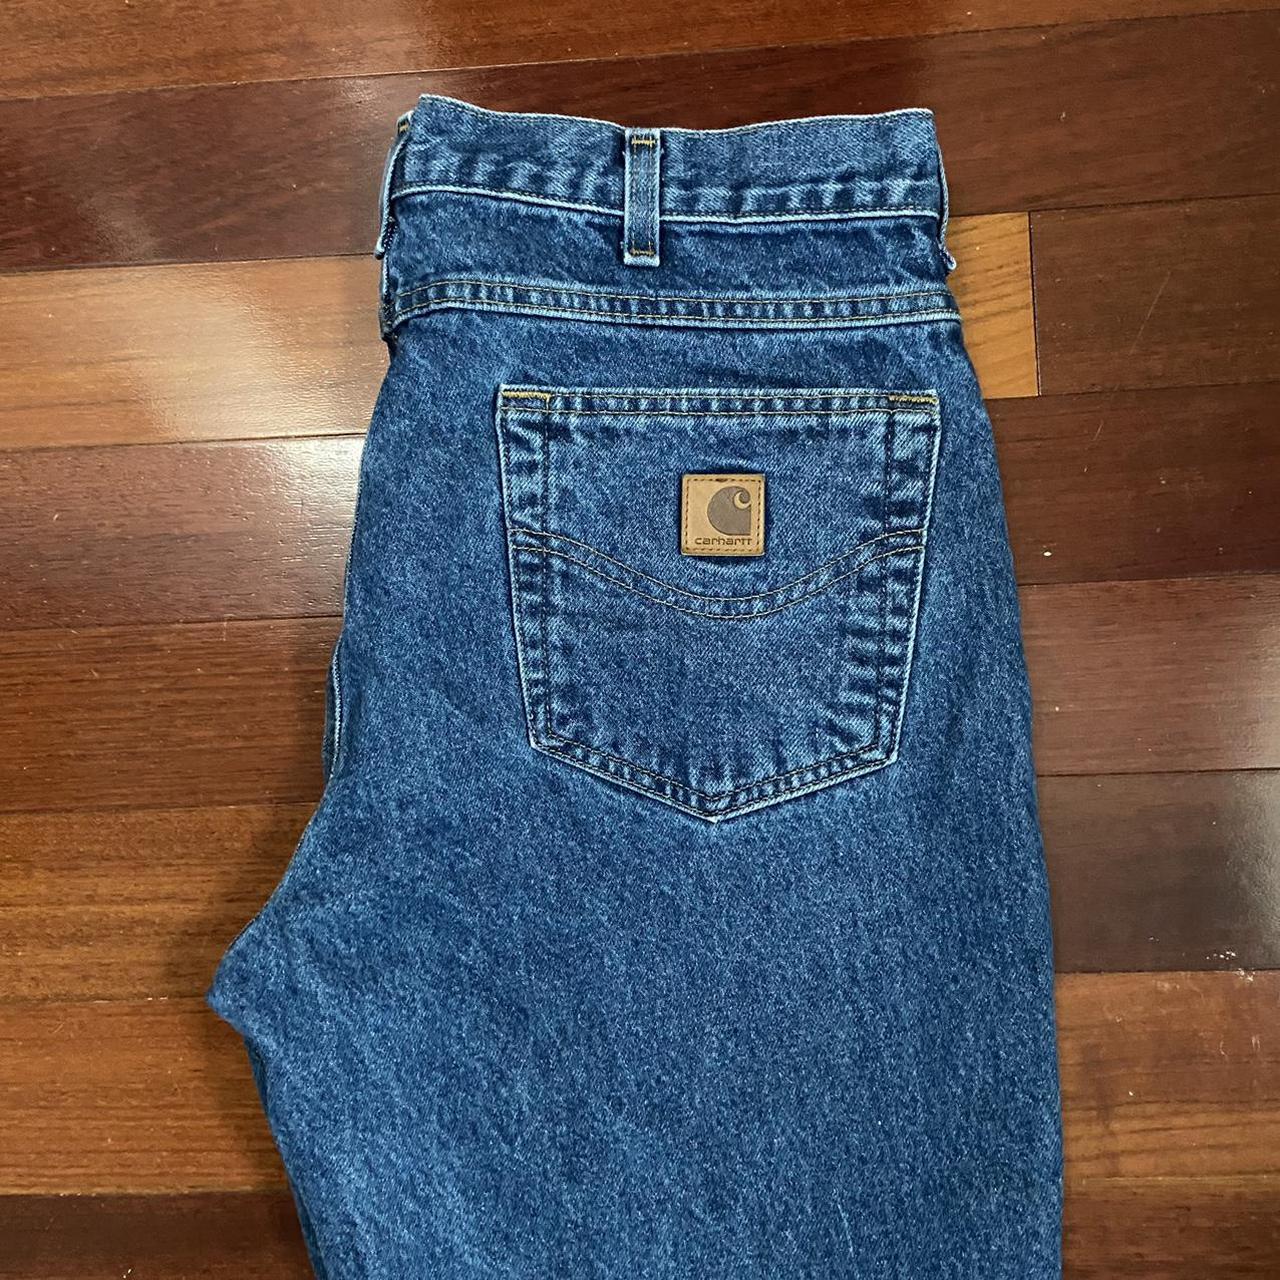 Carhartt blue jeans - traditional fit 34x30 Great... - Depop